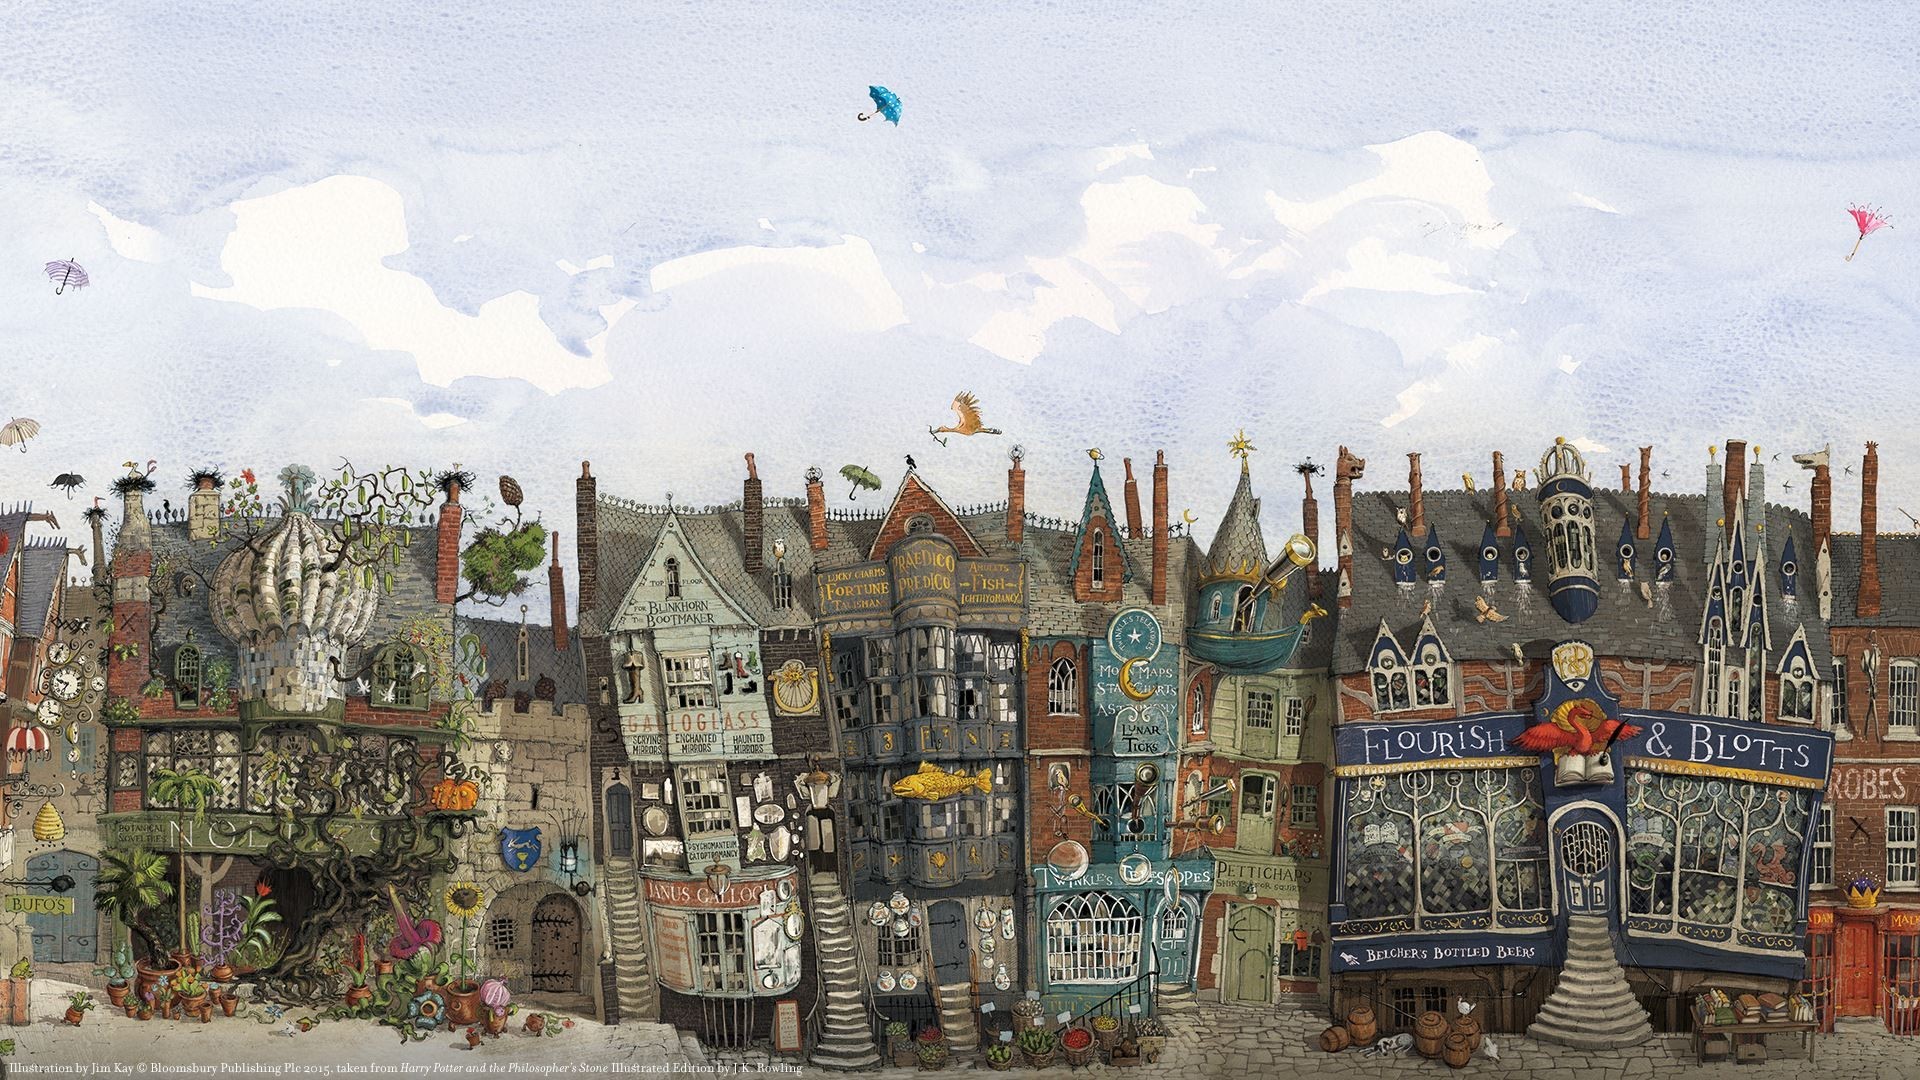 Diagon alley murals to size of wall  traditional dirty grunge   myloviewcom